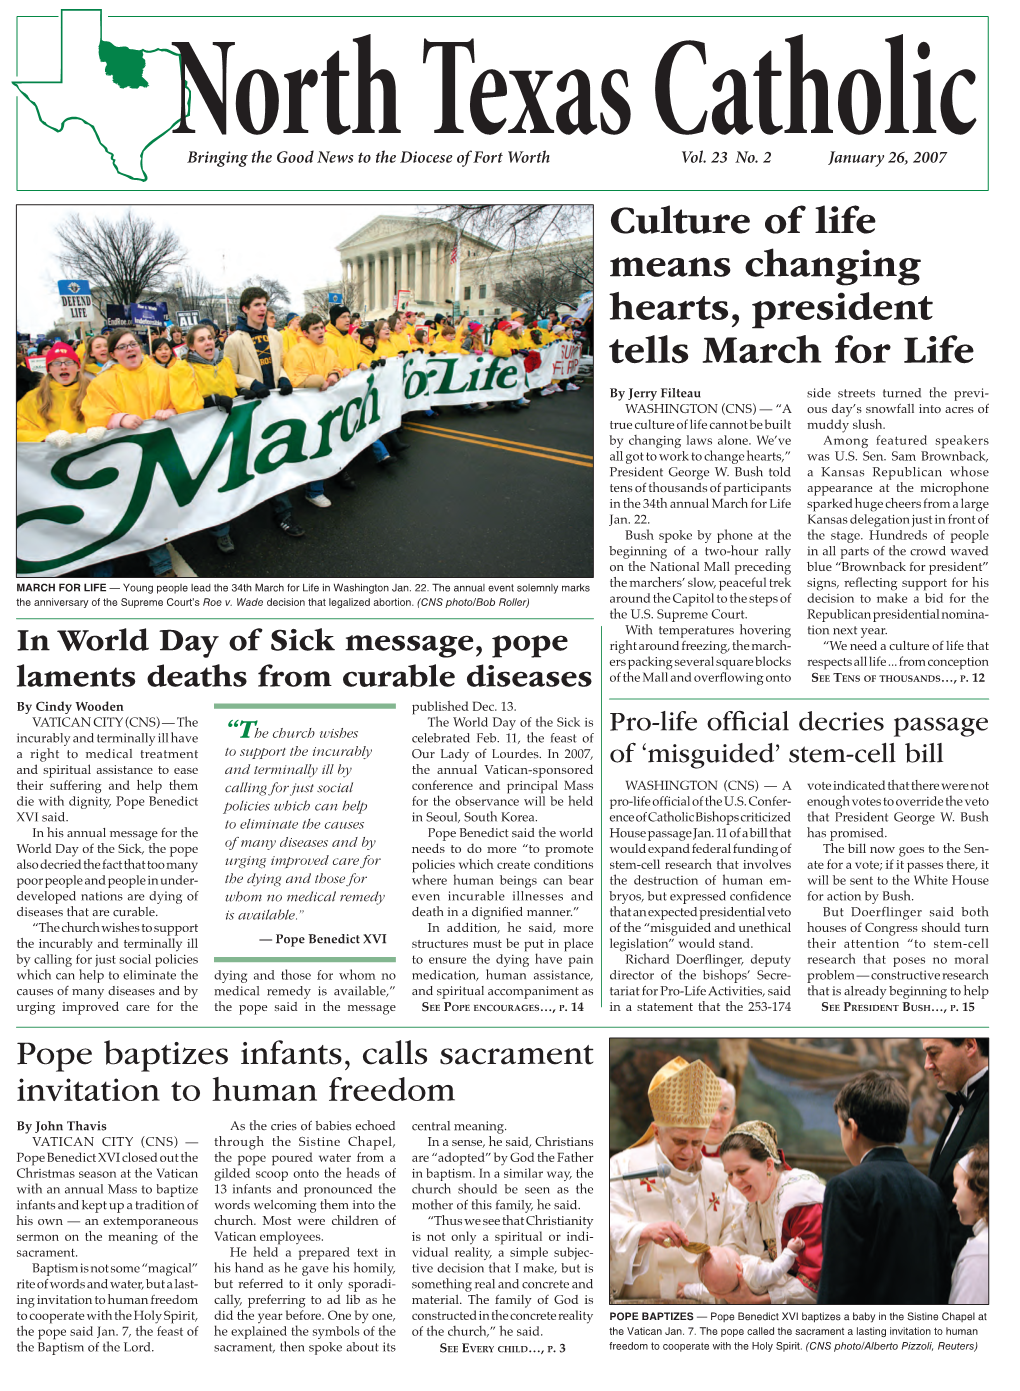 Culture of Life Means Changing Hearts, President Tells March for Life